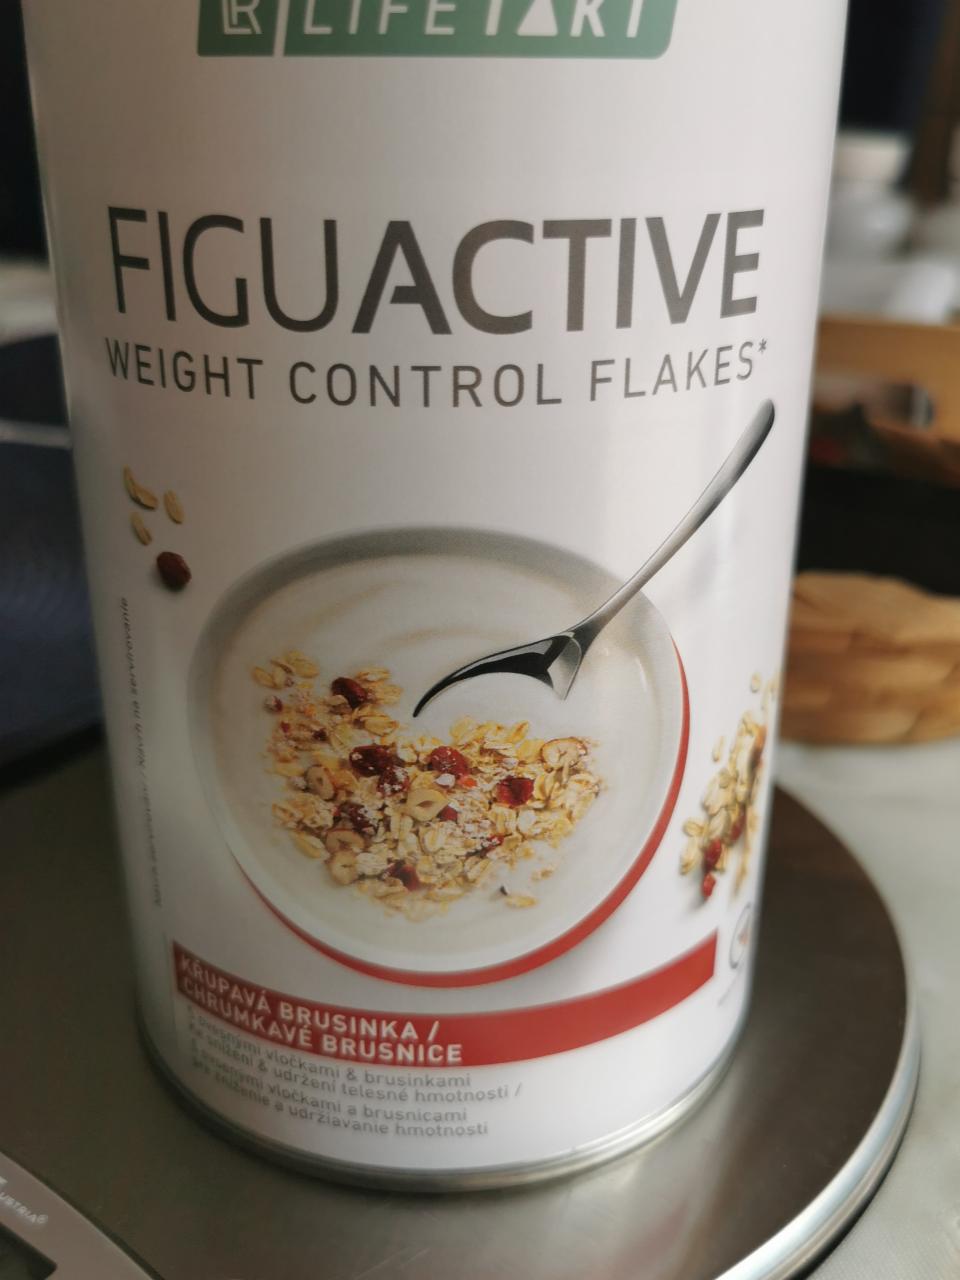 Fotografie - Figuactive Weight control flakes